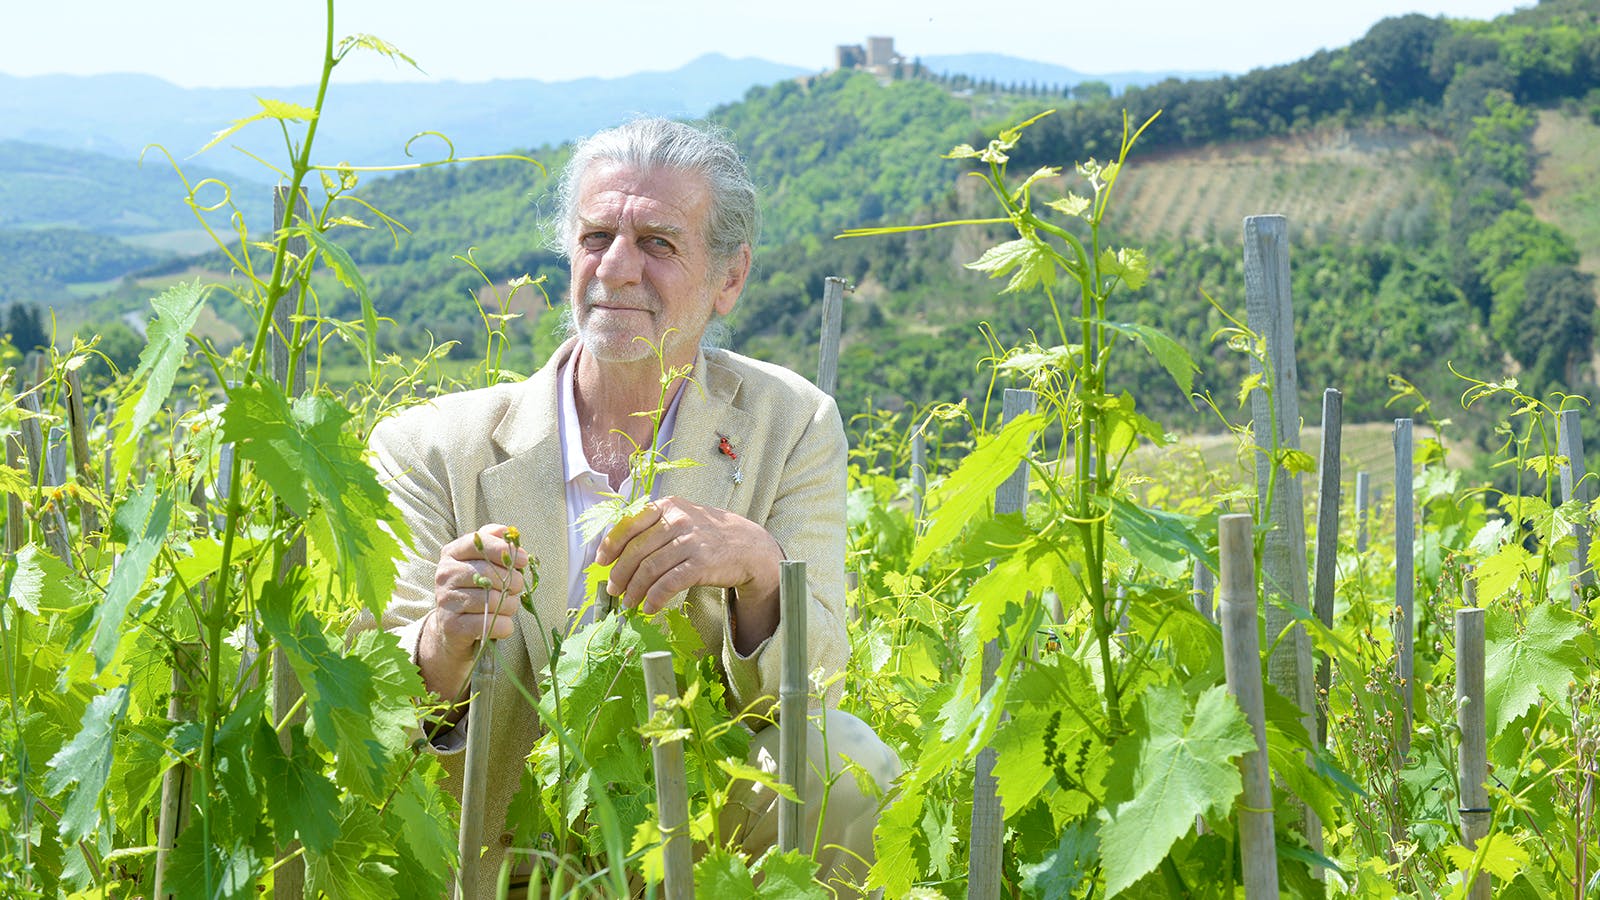 "A Wonderful site and an Inspirational Producer from Montalcino"